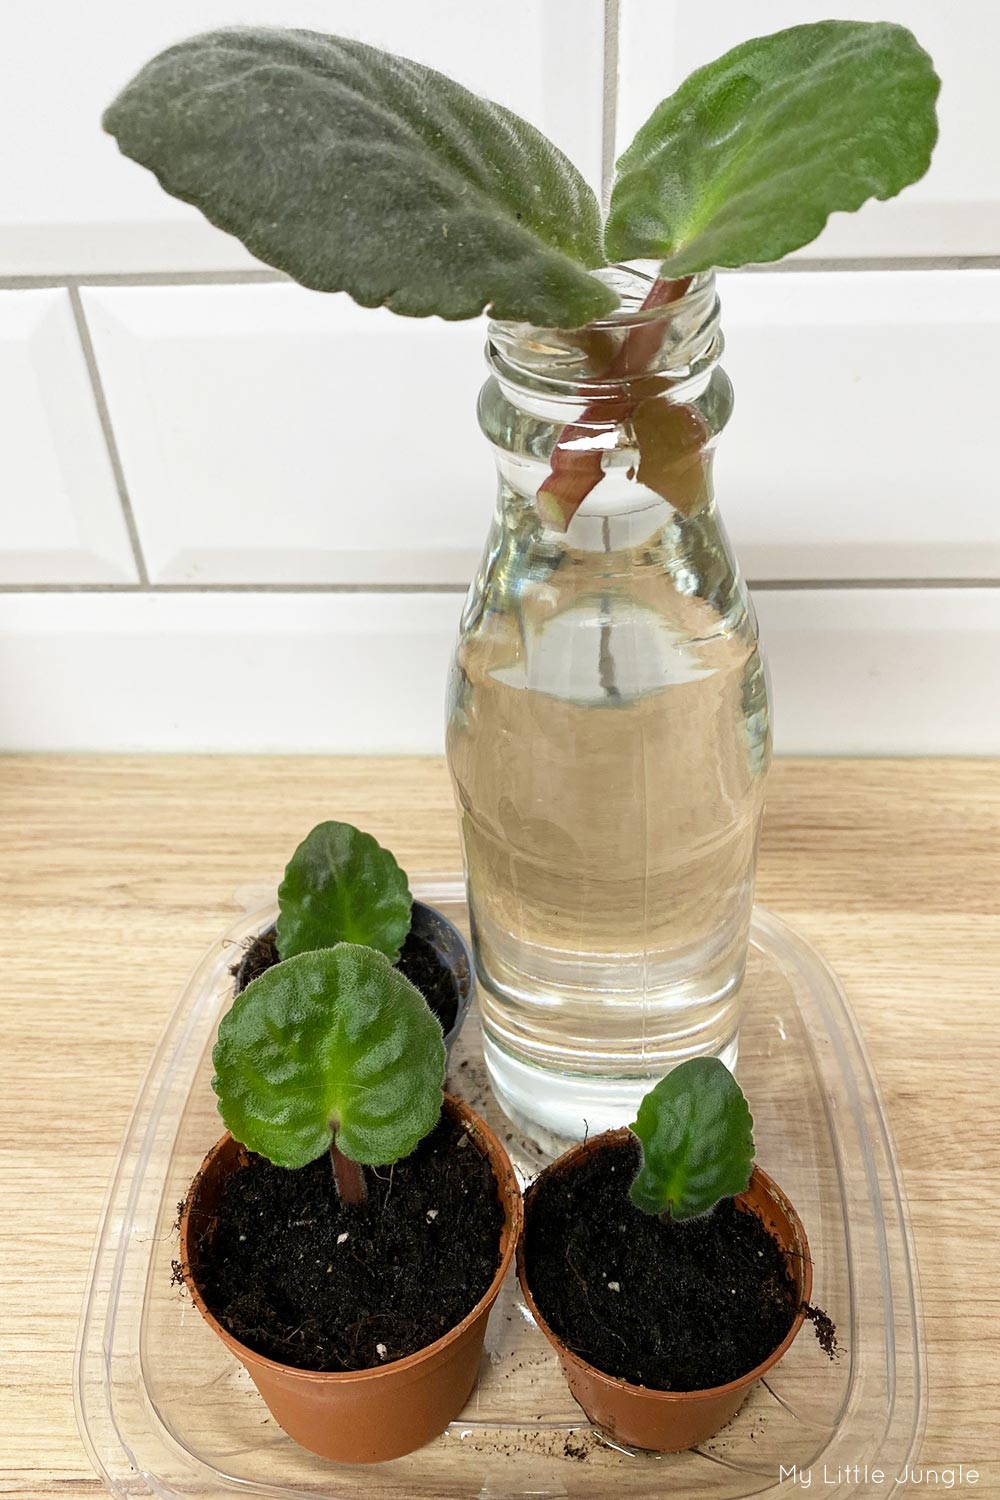 African Violet Propagation from Leaf